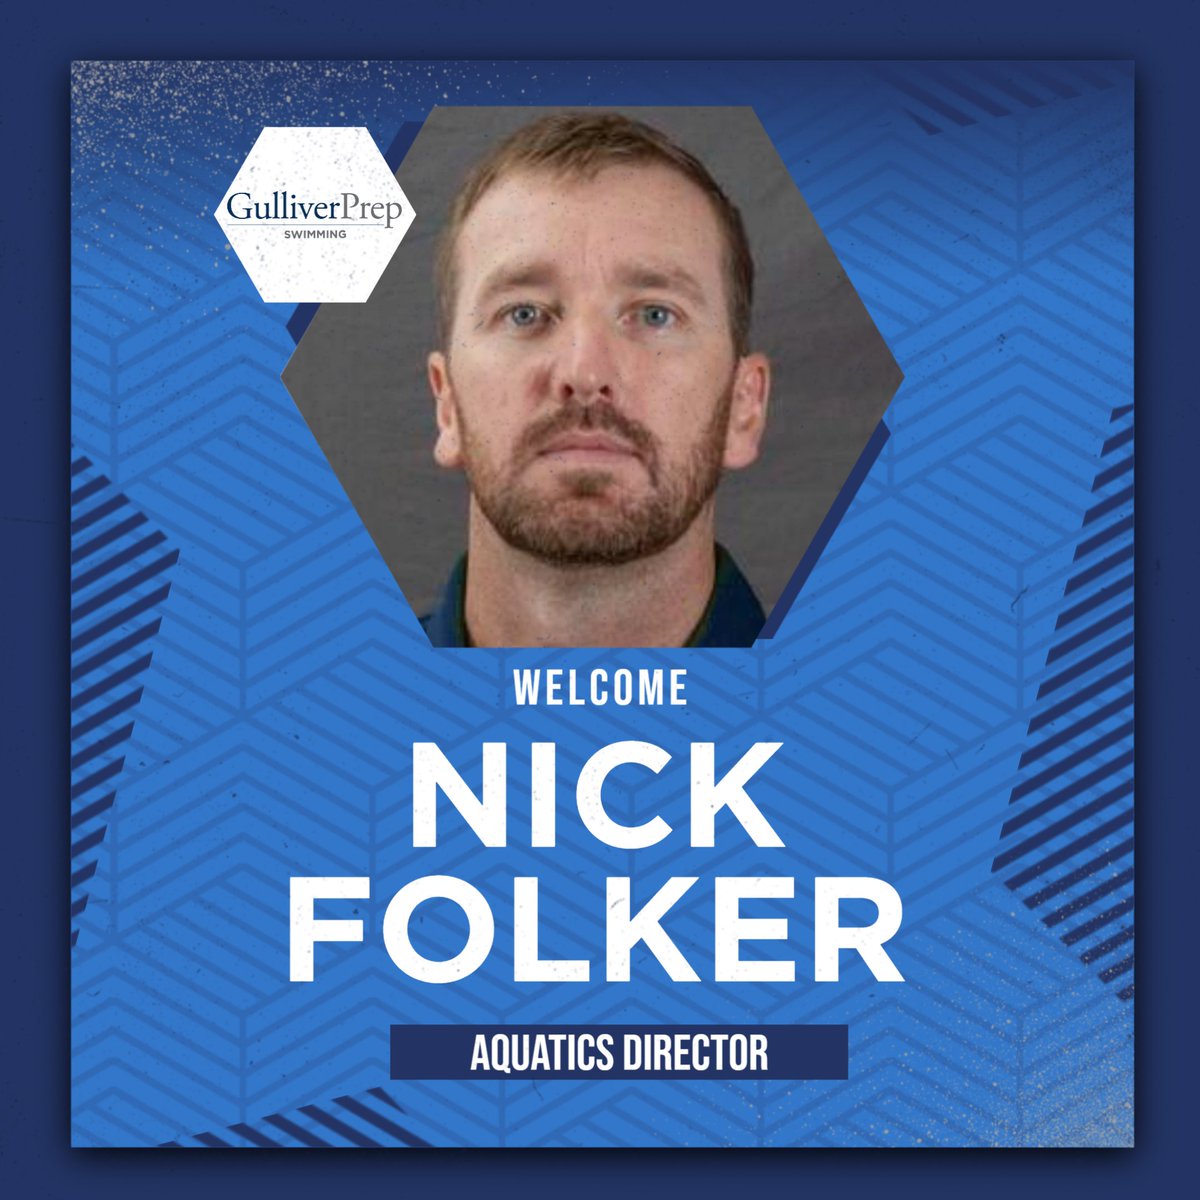 We are excited to announce and welcome our new Aquatics Director, Nick Folker. Coach Folker brings a wealth of experience to our school community and is poised to continue to build upon the success of our aquatics program.